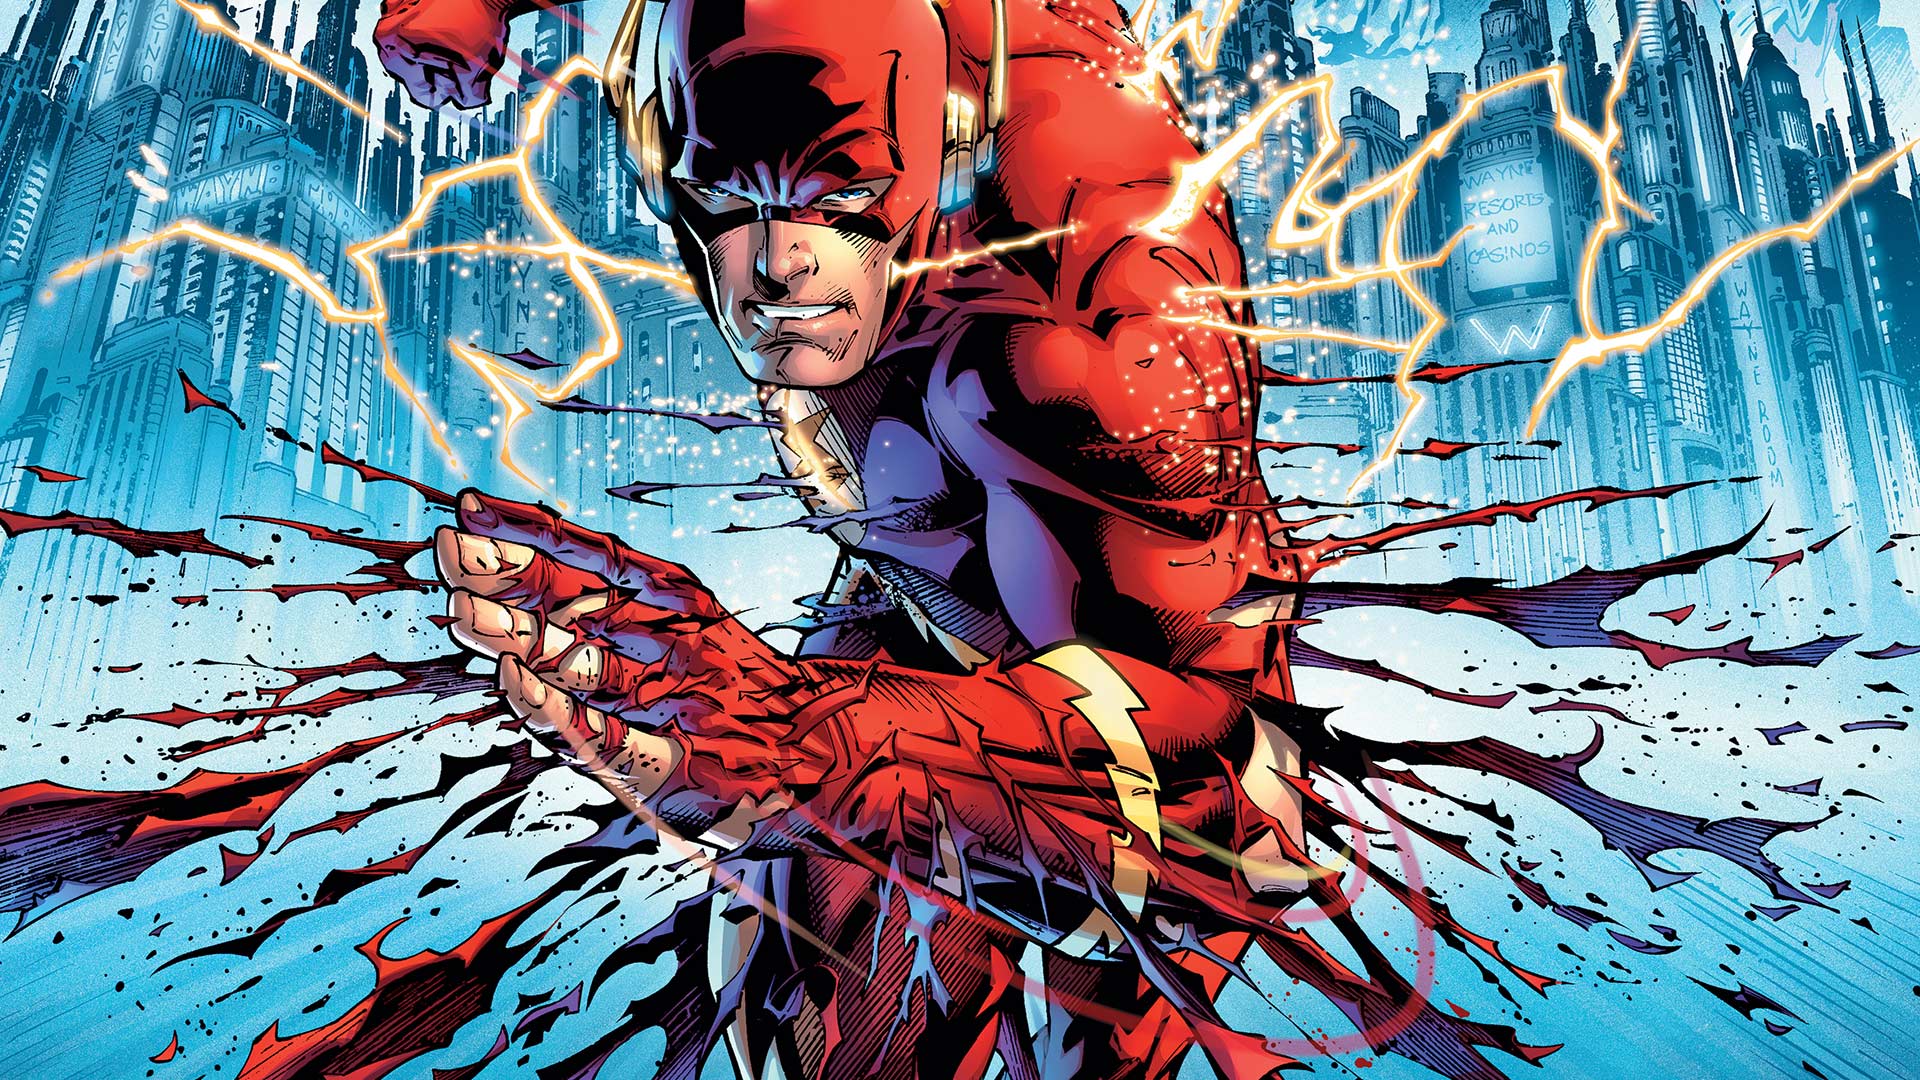 Flashpoint comic book story that inspires The Flash movie explained